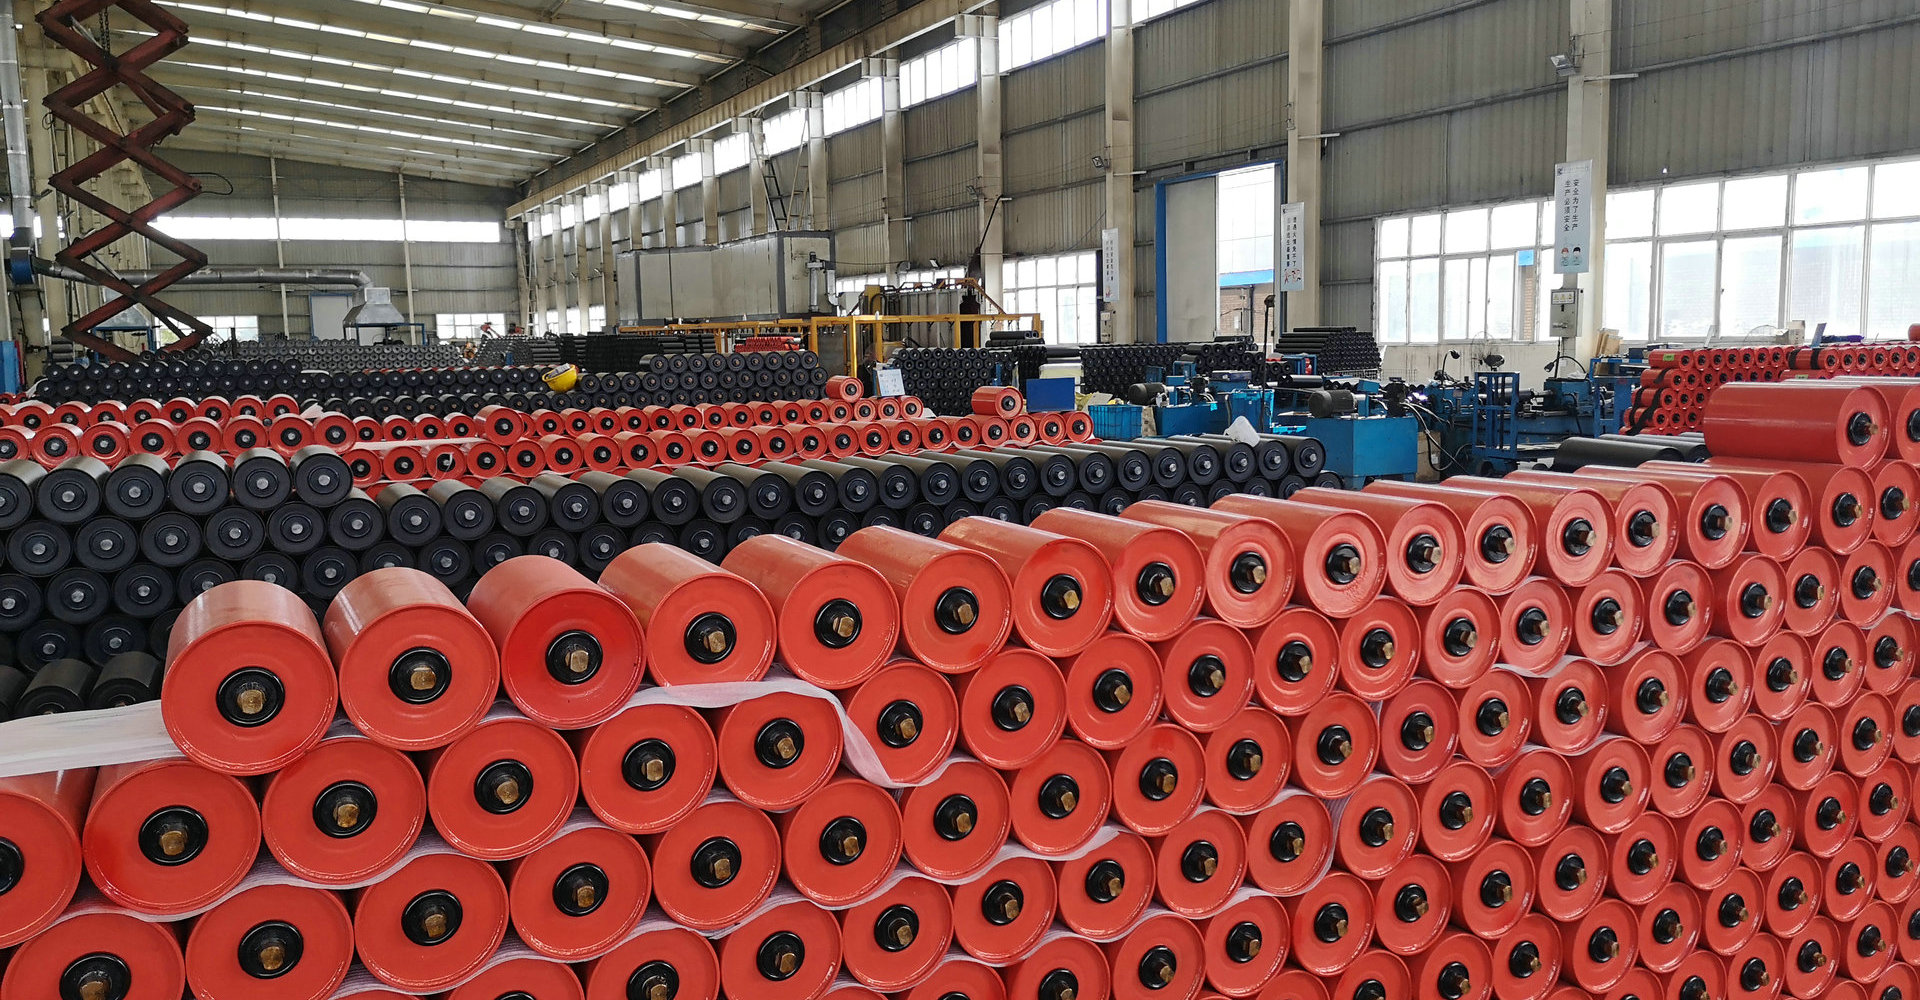 Your Trusted Partner for Conveyor Carrying Rollers and More